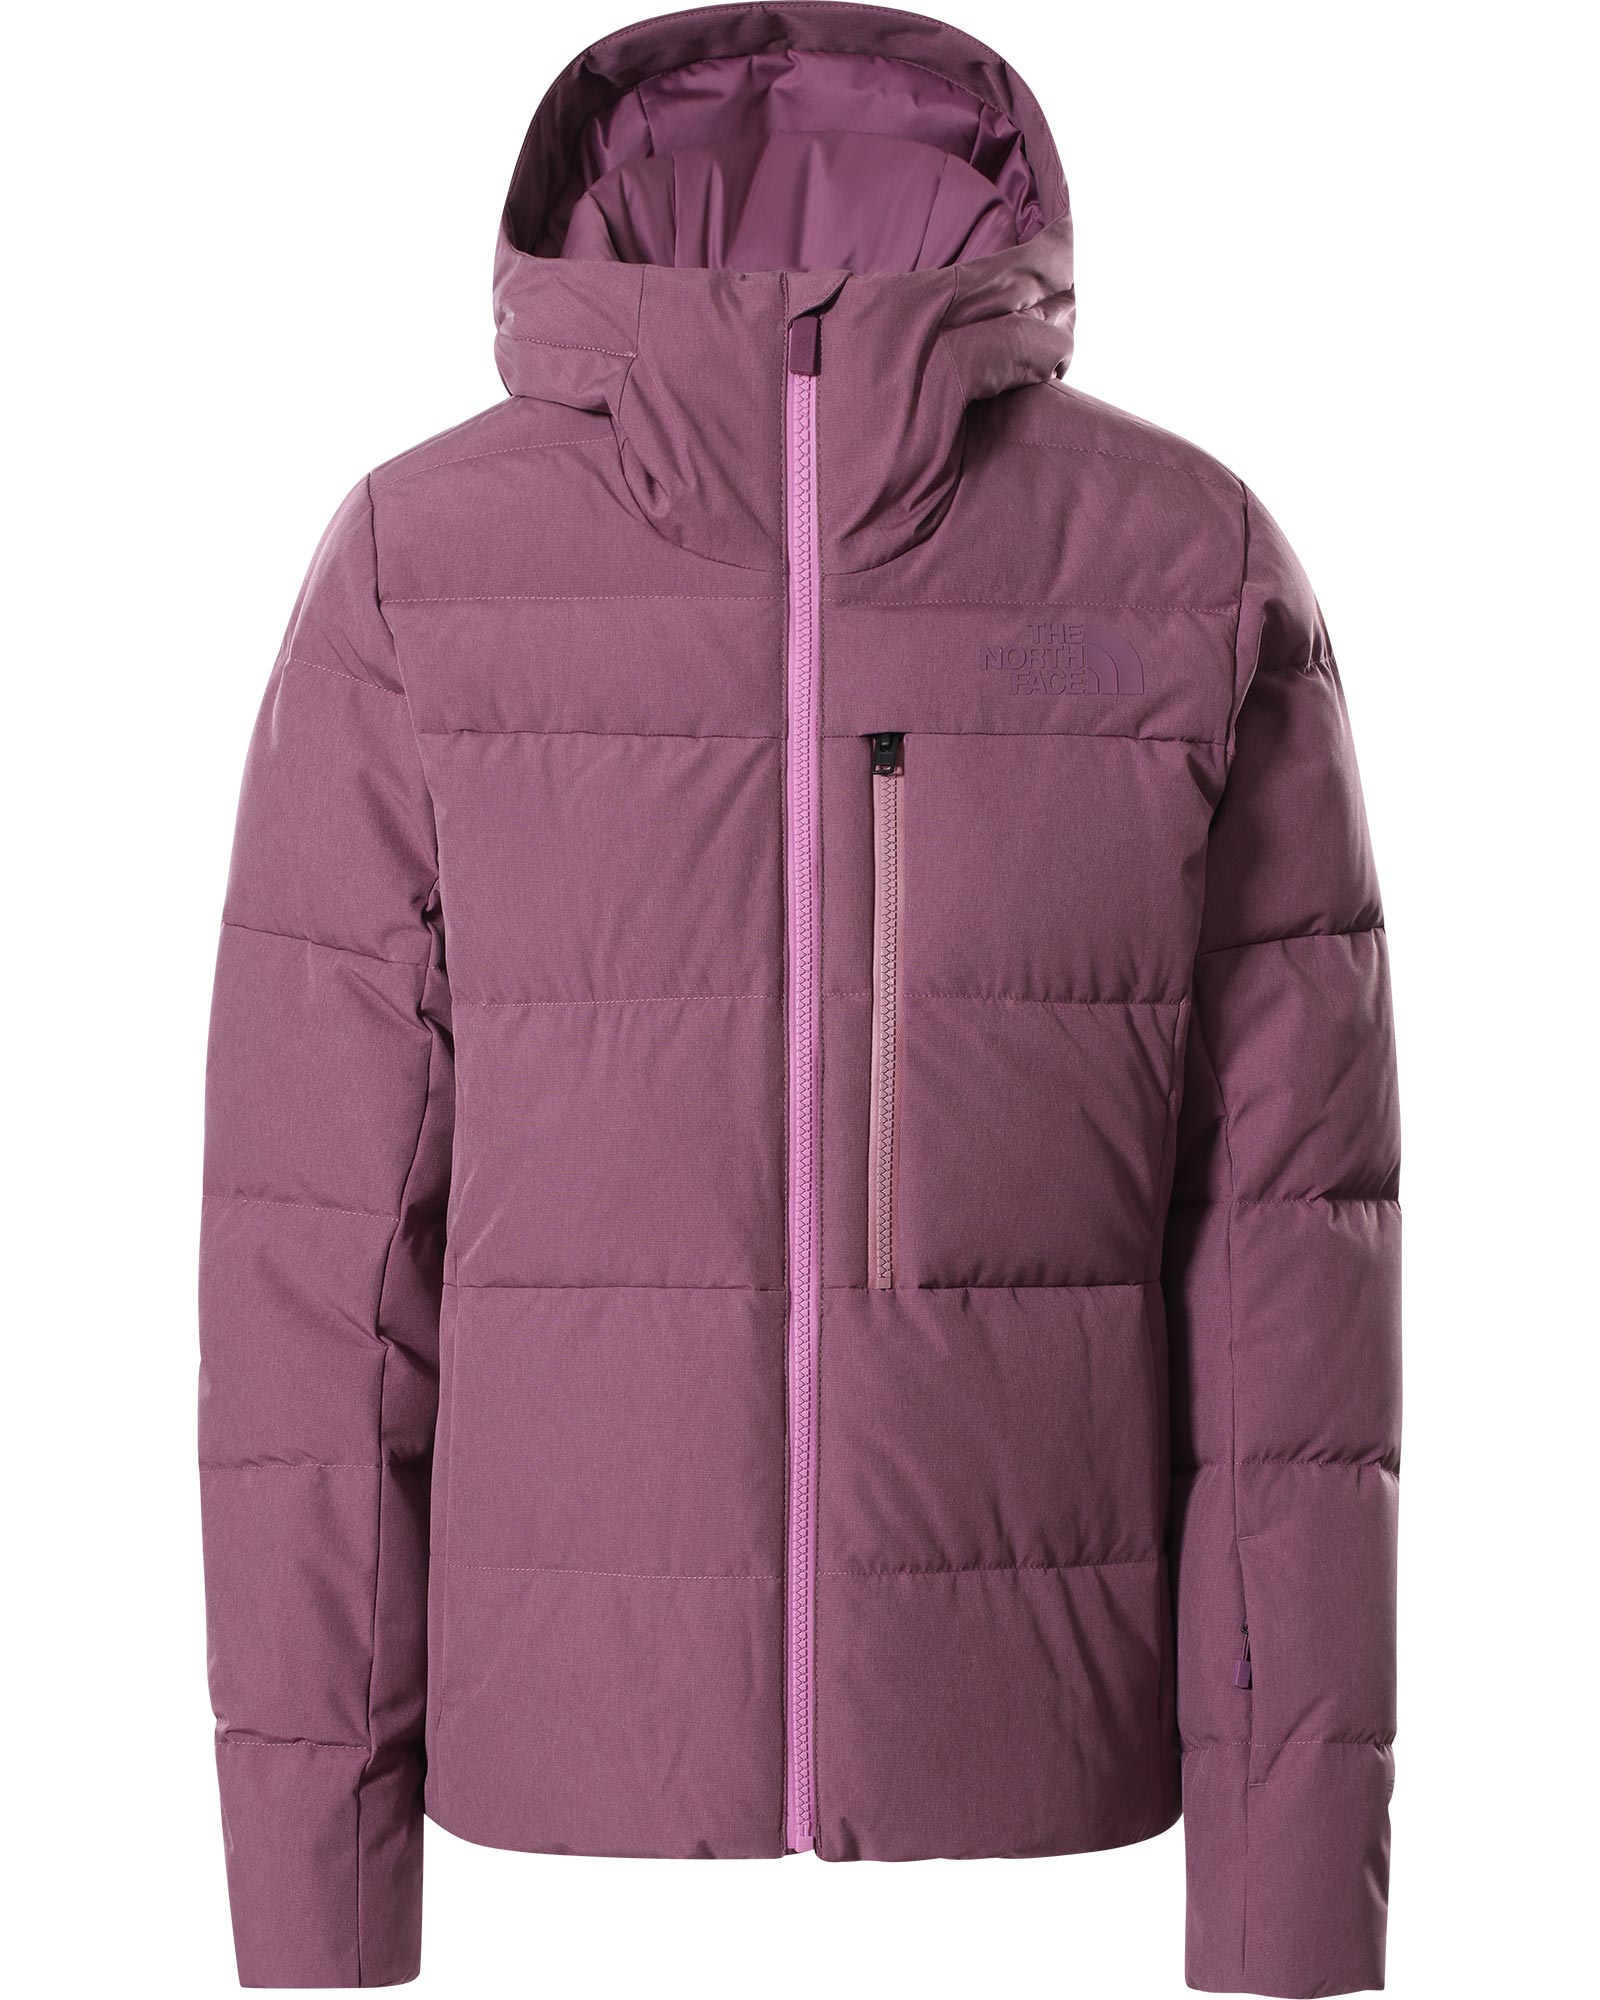 The North Face Heavenly Down Women’s Jacket - Pikes Purple Heather M